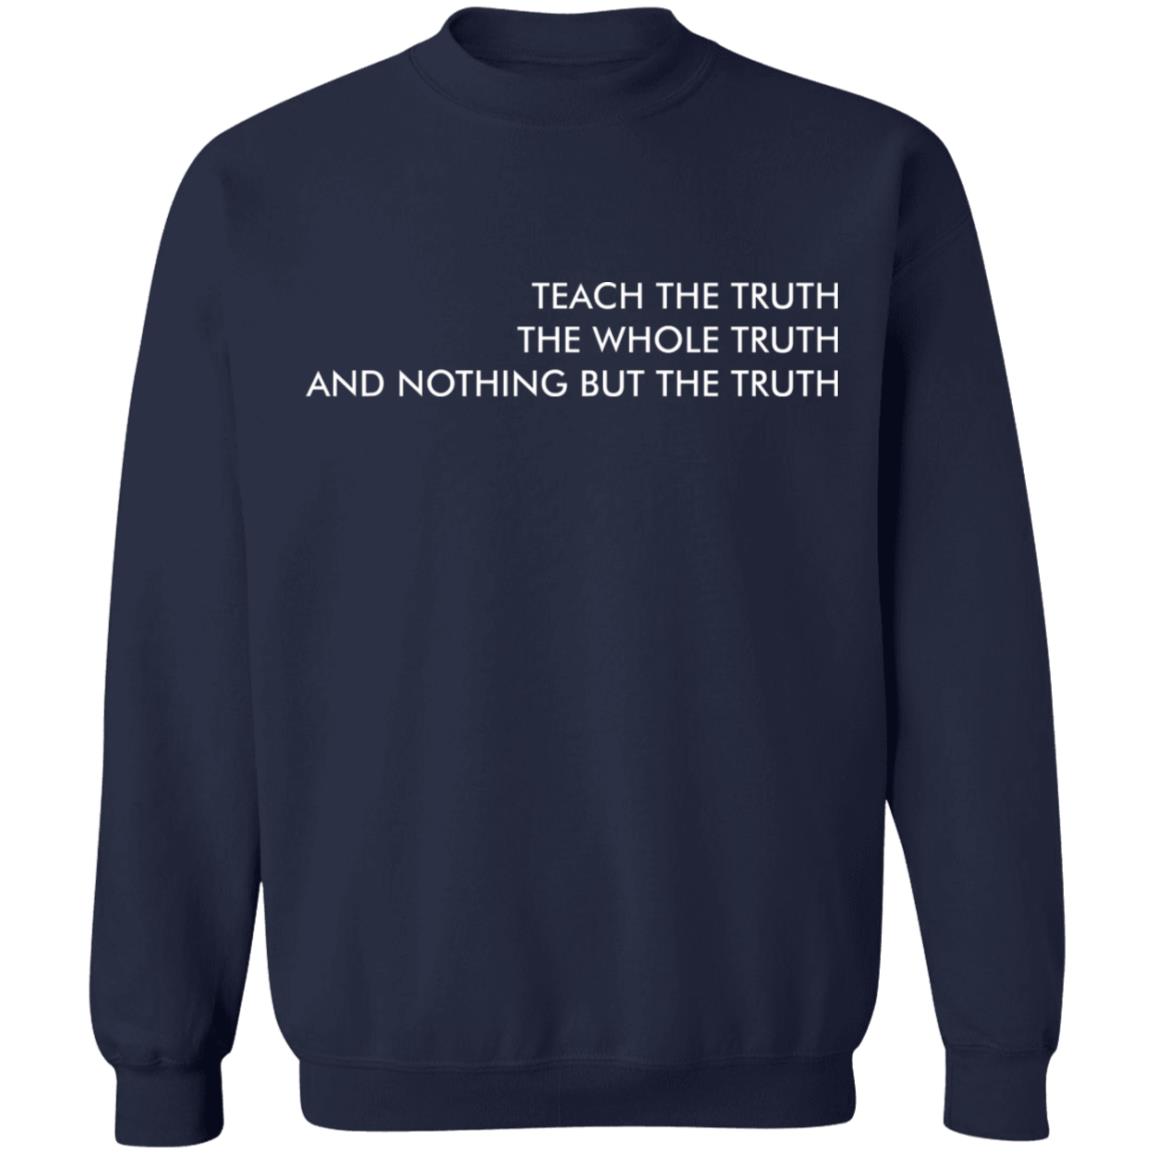 Teach the truth the whole truth and nothing but the truth shirt - Rockatee